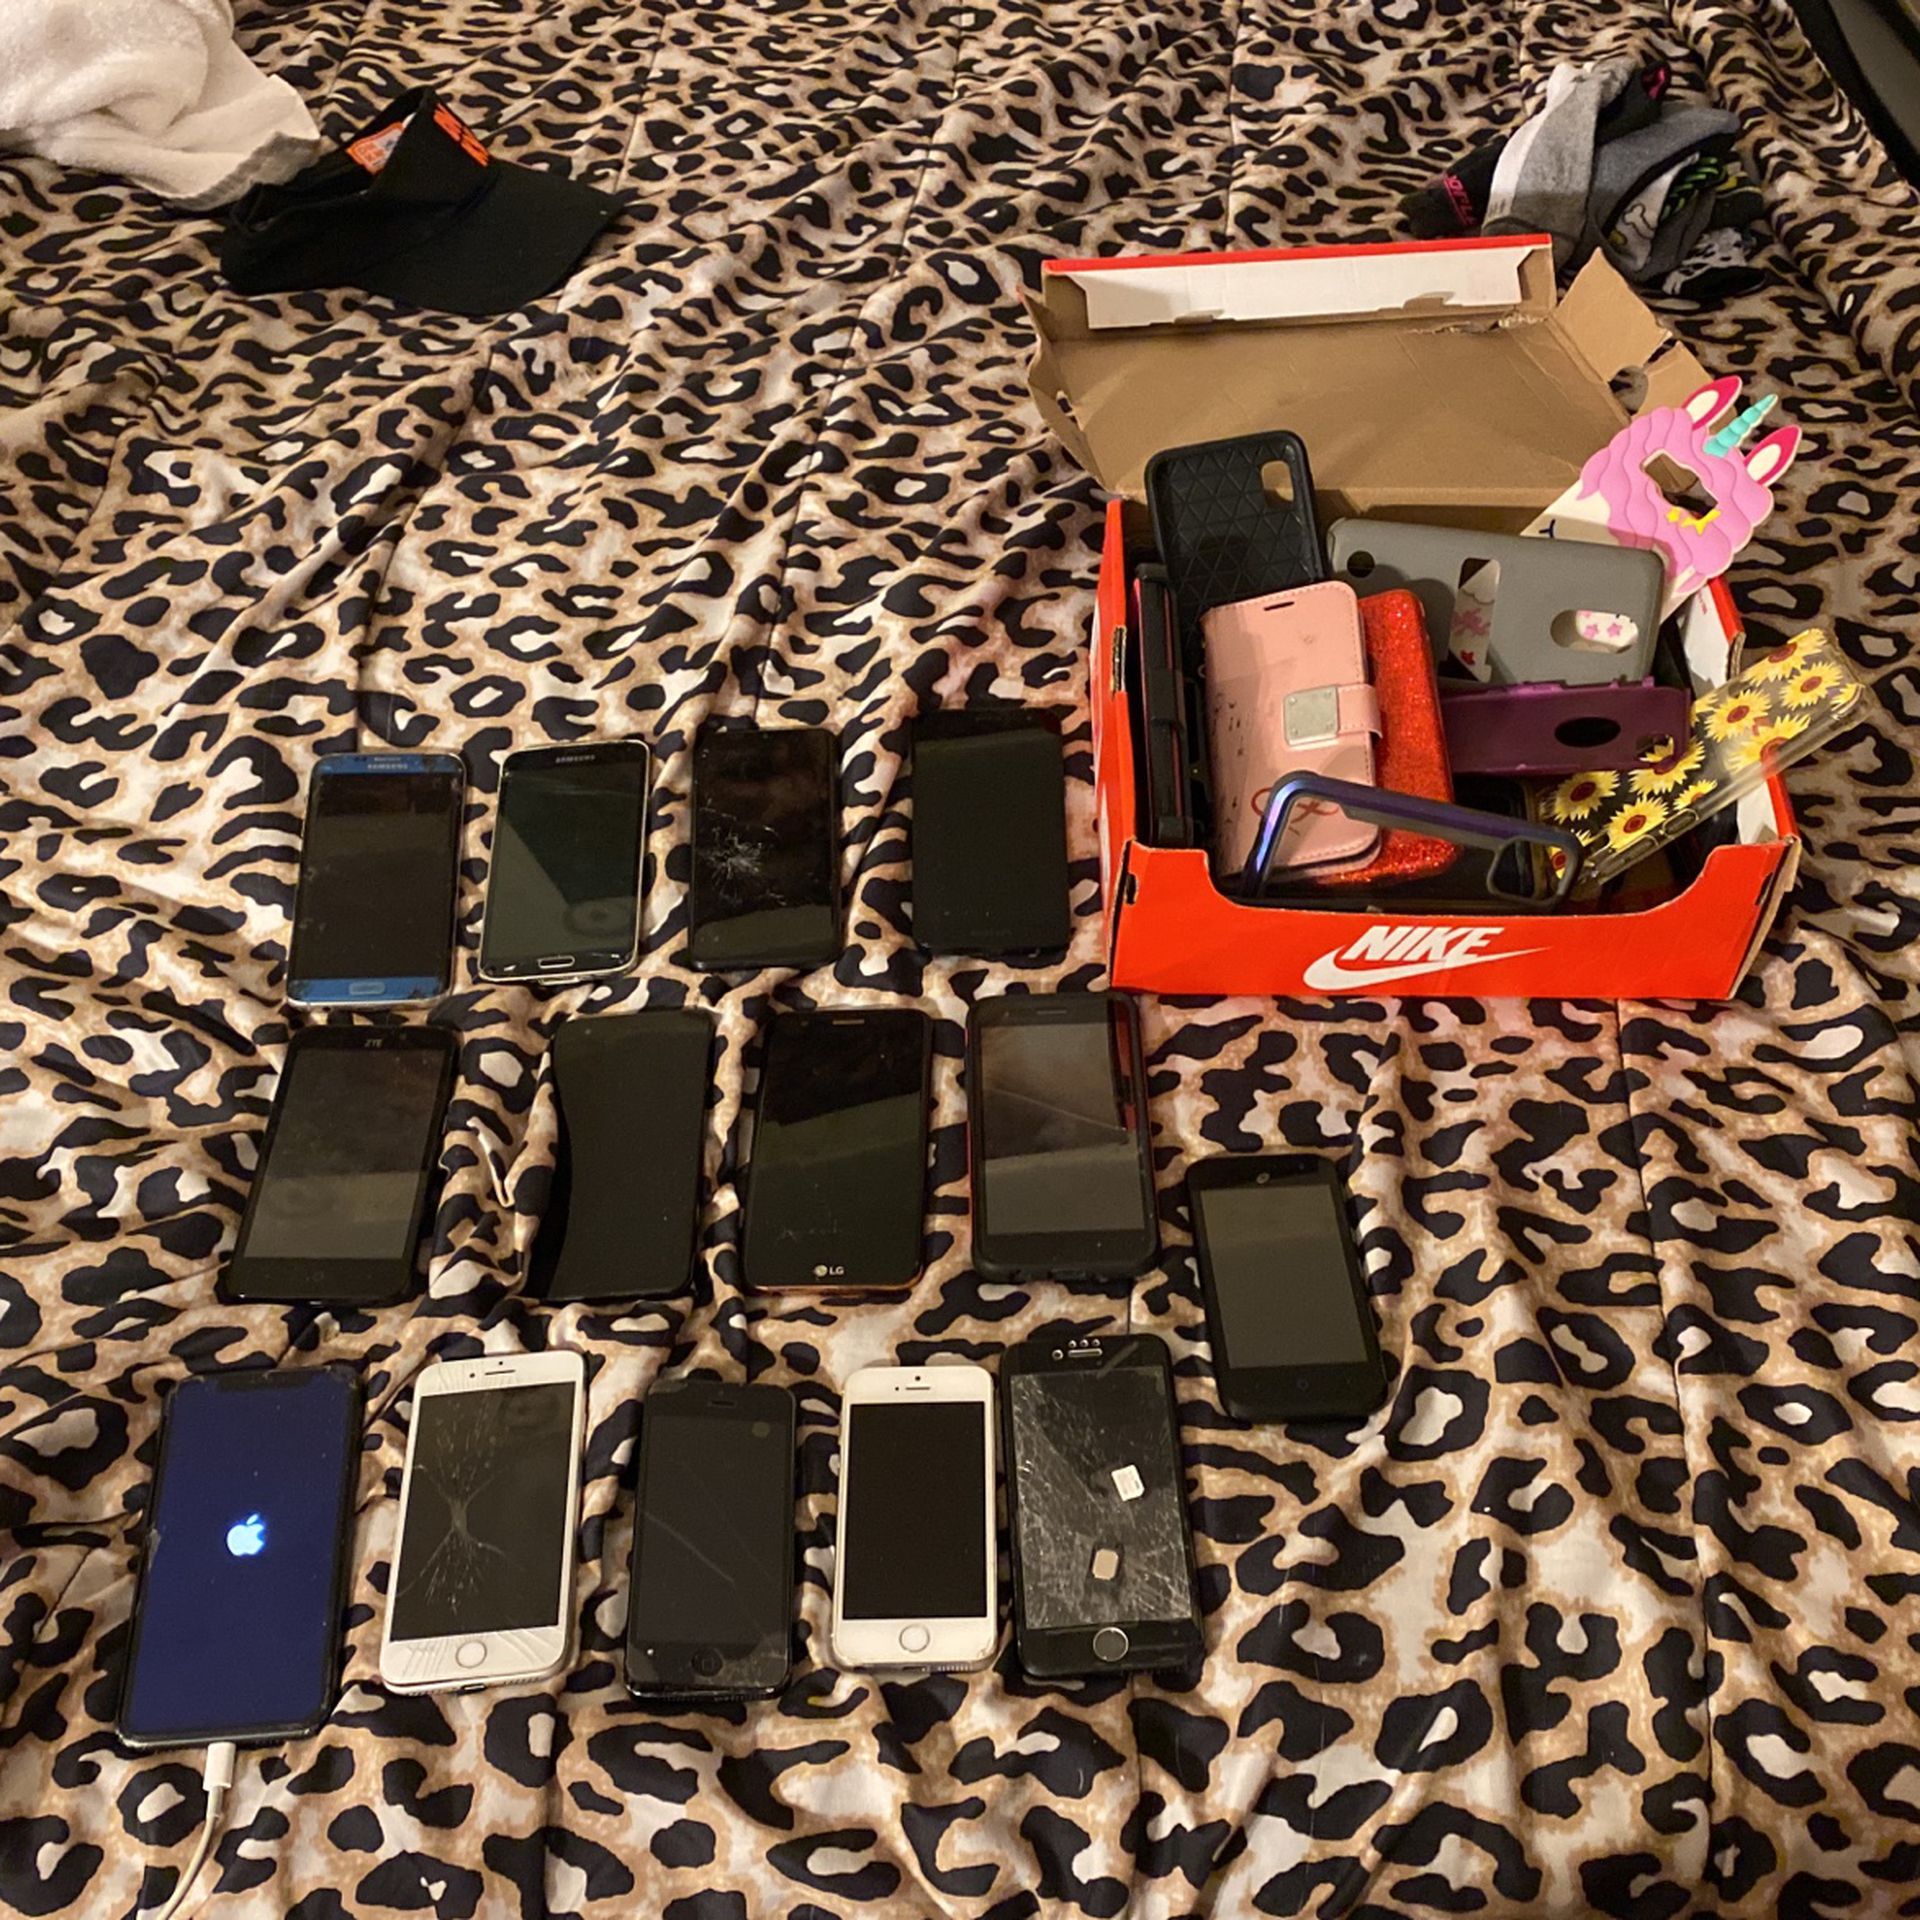 14 Cell Phones For Sale As A Bundle Or Singles I Have 5 I Phones Ranging From Series 11 To Series 4!4 Lg Phones!4 Samsung Phones And Box Of Cases!!